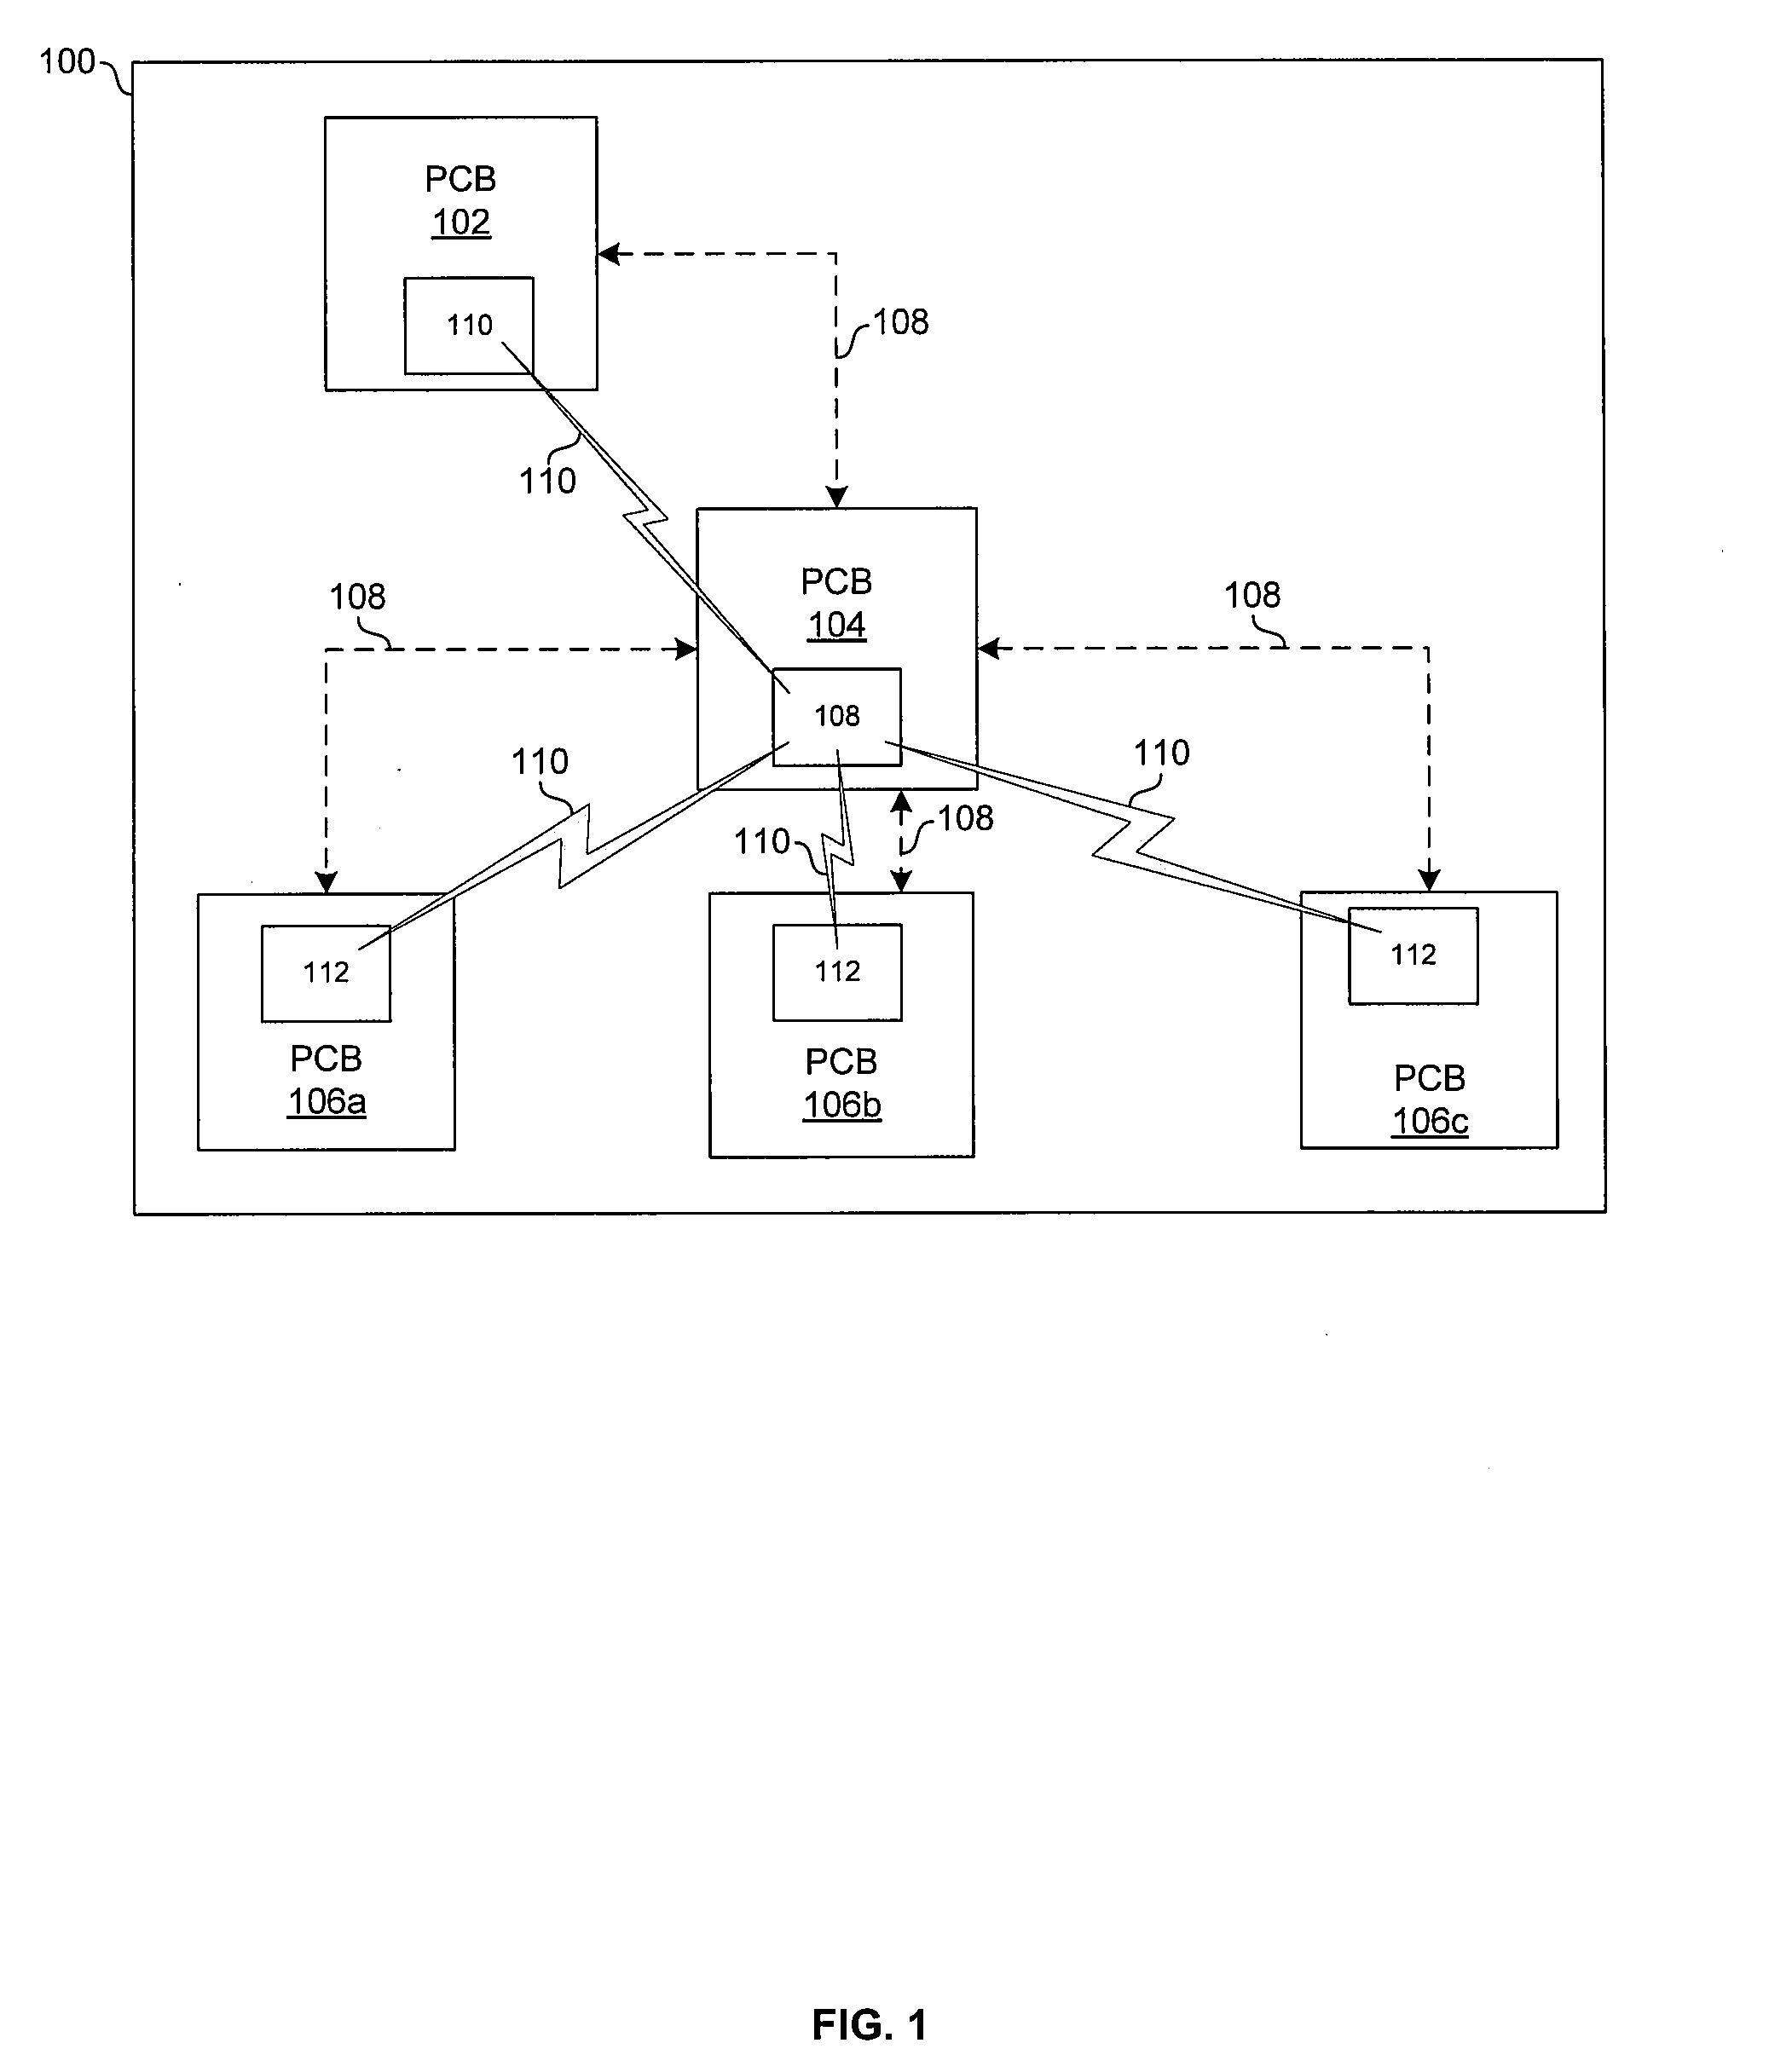 Method And System For Inter-PCB Communication Utilizing A Spatial Multi-Link Repeater